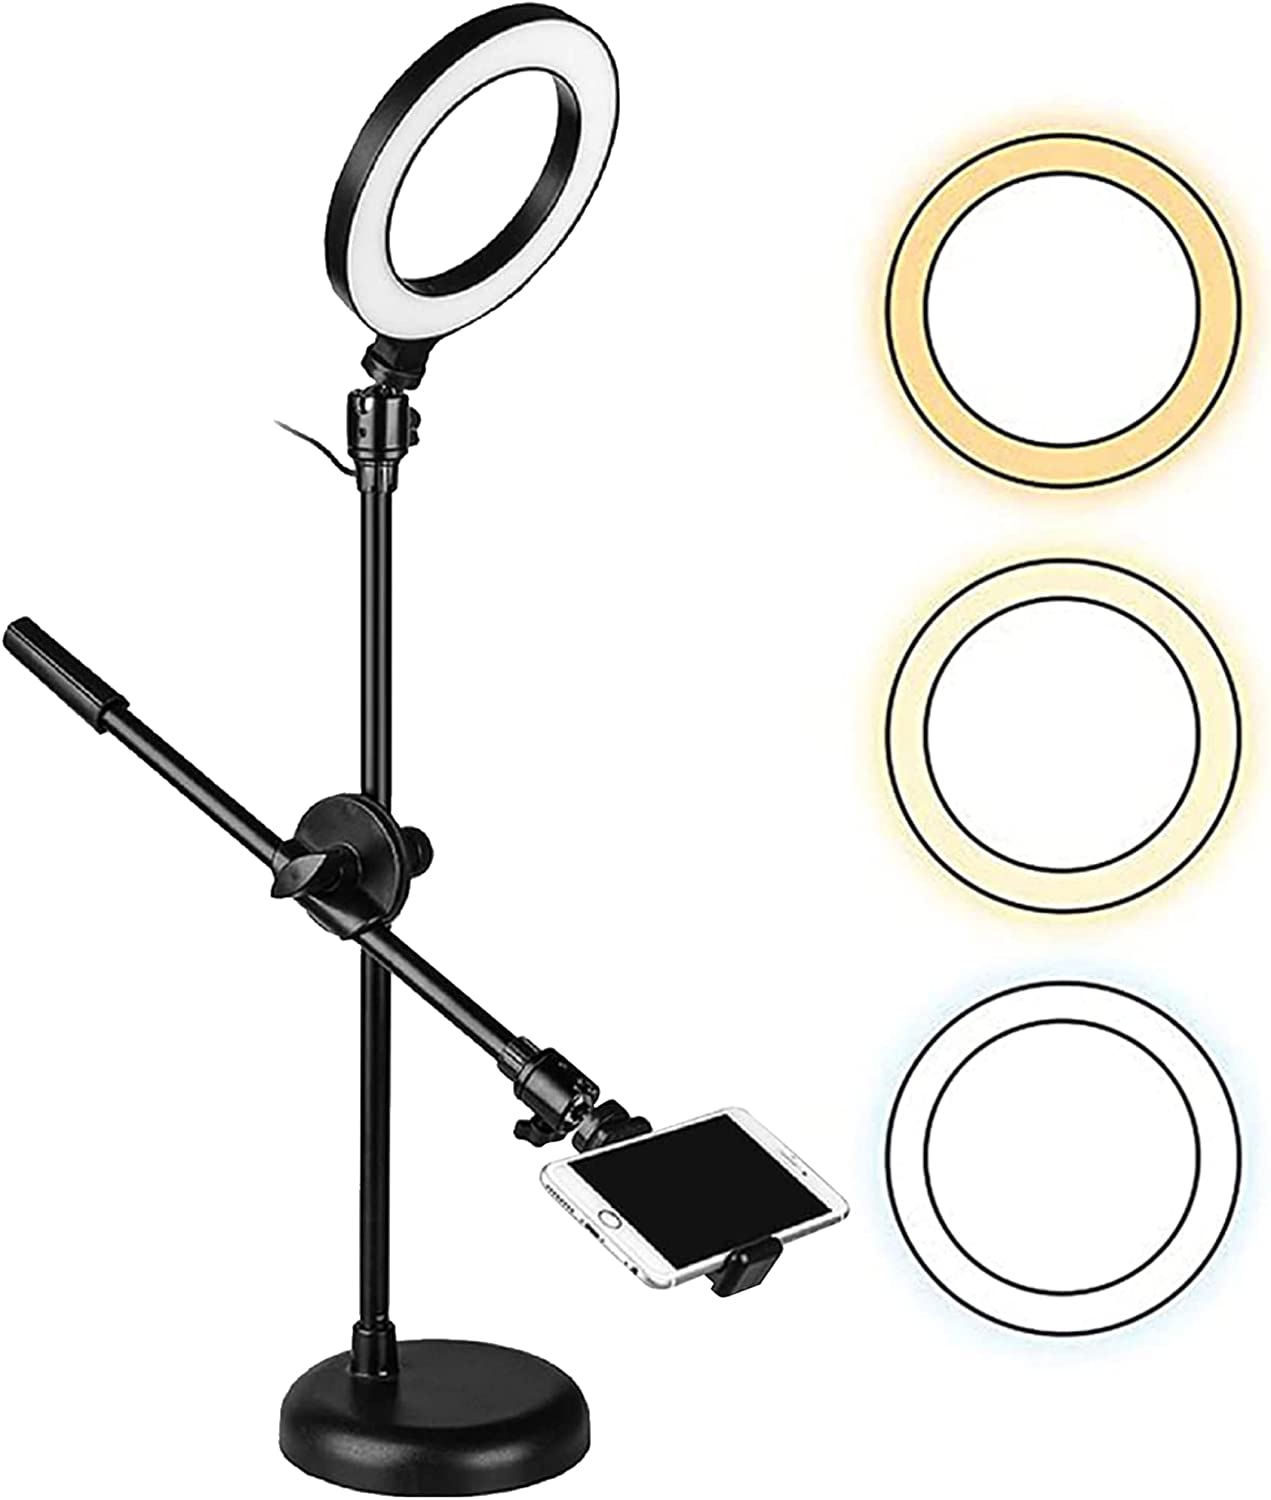 5 Core Ring Light 6 Inch W Phone Stand Adjustable Selfie Lights For Makeup Recording Podcast Streaming Content Creator Essentials - RING MOB PL